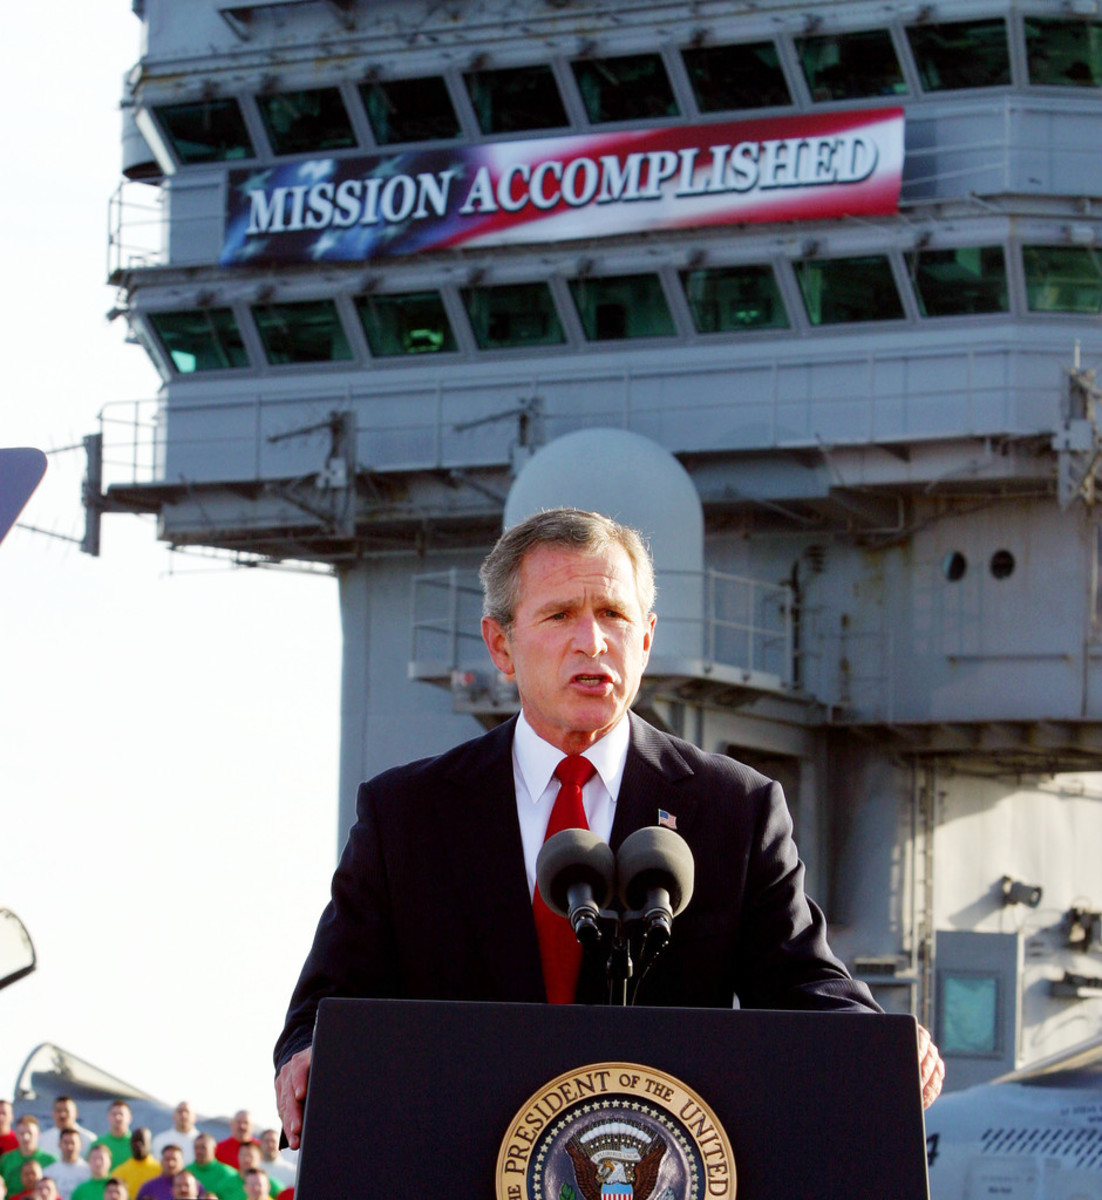 President Bush stands aboard the USS Abraham Lincoln to deliver his Mission Accomplished speech.